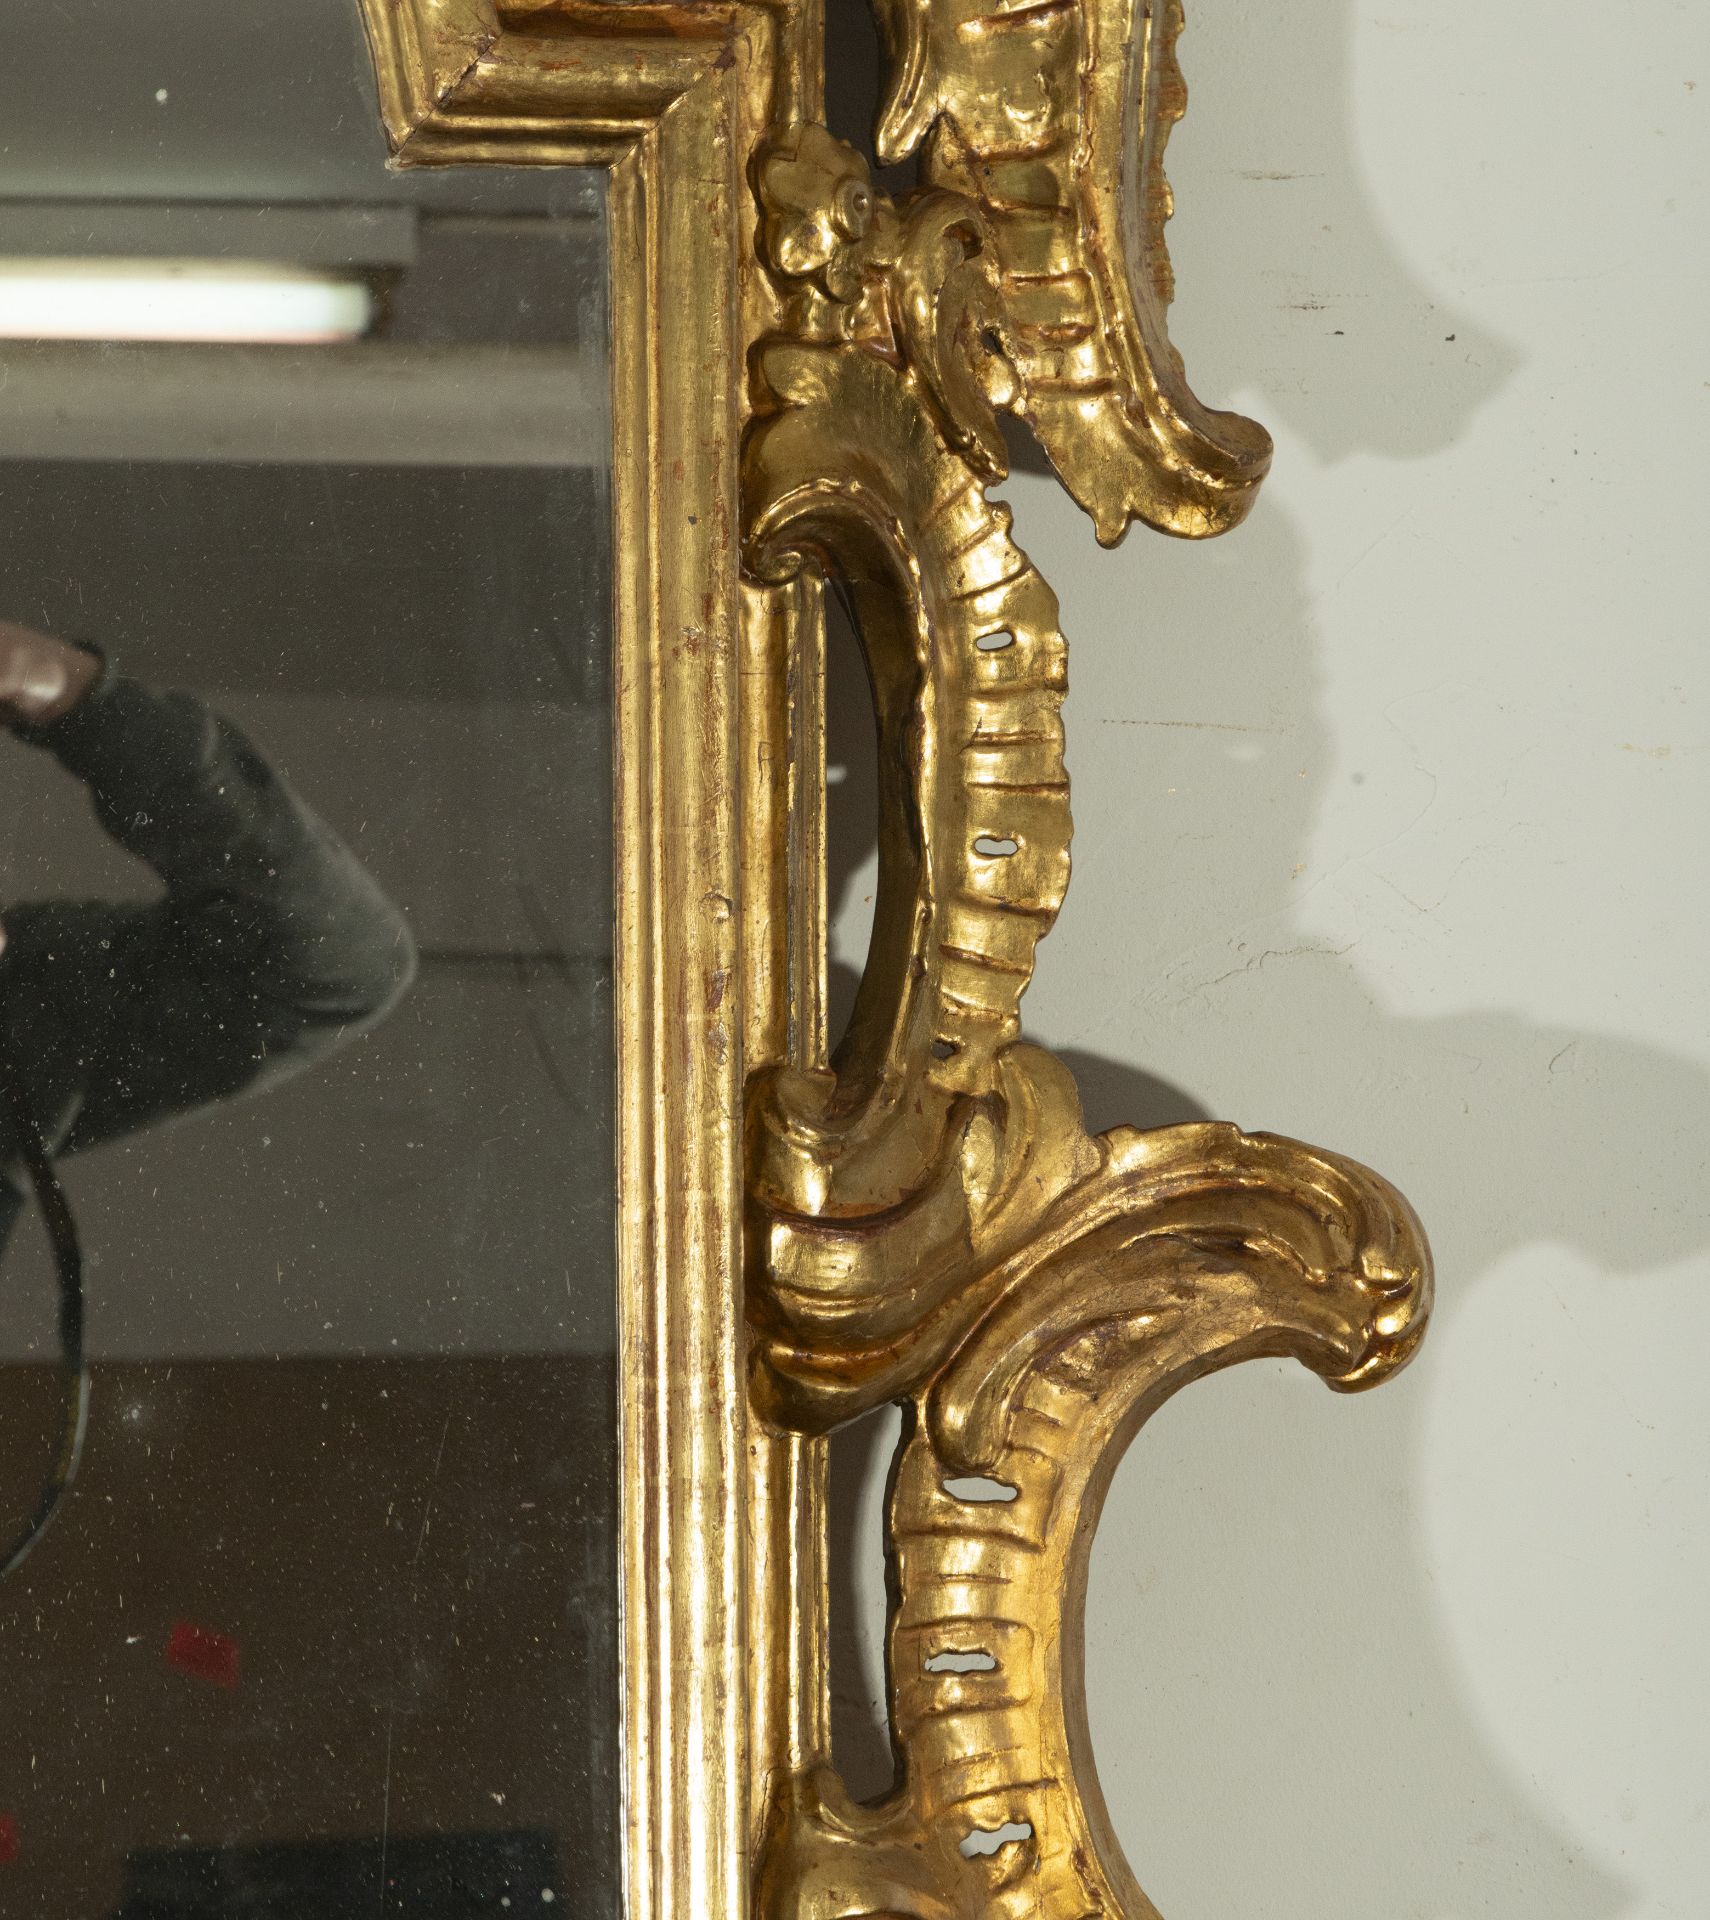 Antique Spanish frame from the 17th century transformed into a carved wood mirror - Image 3 of 6